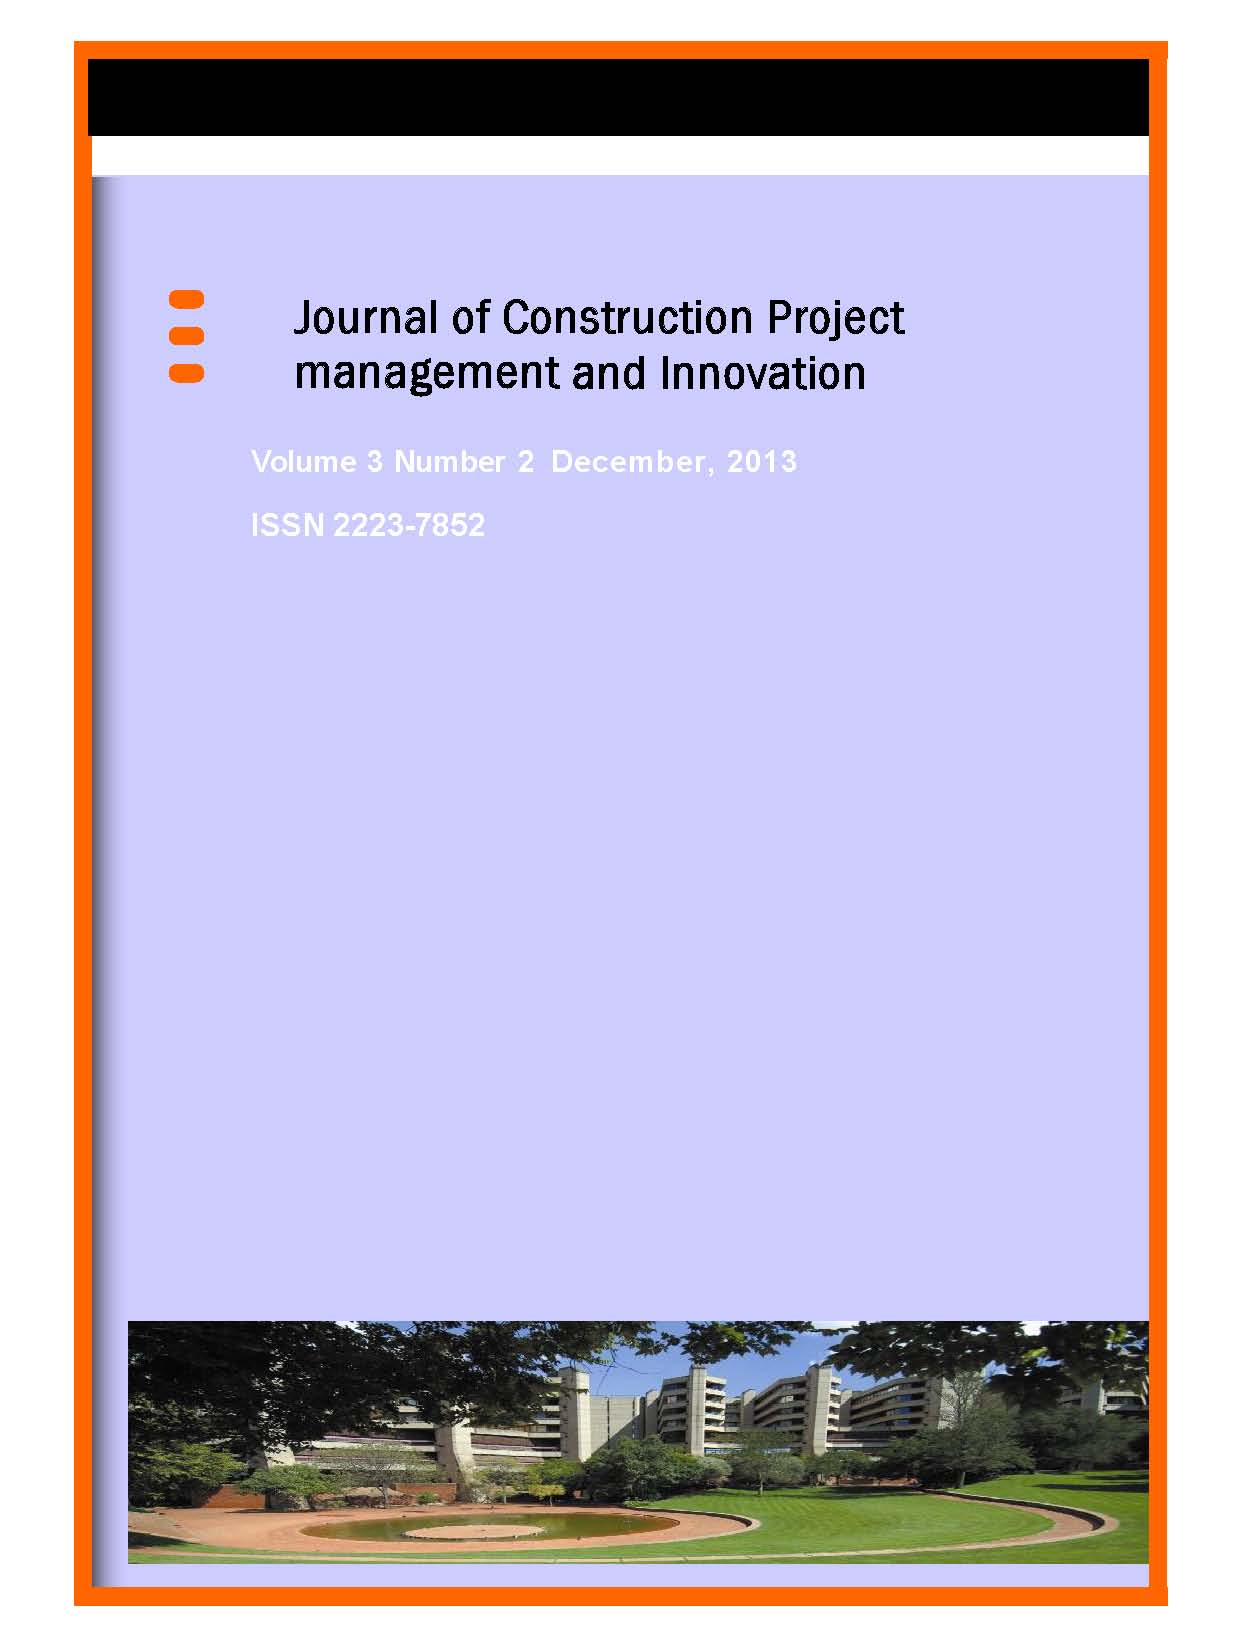 					View Vol. 3 No. 2 (2013): Journal of Construction Project Management and Innovation
				